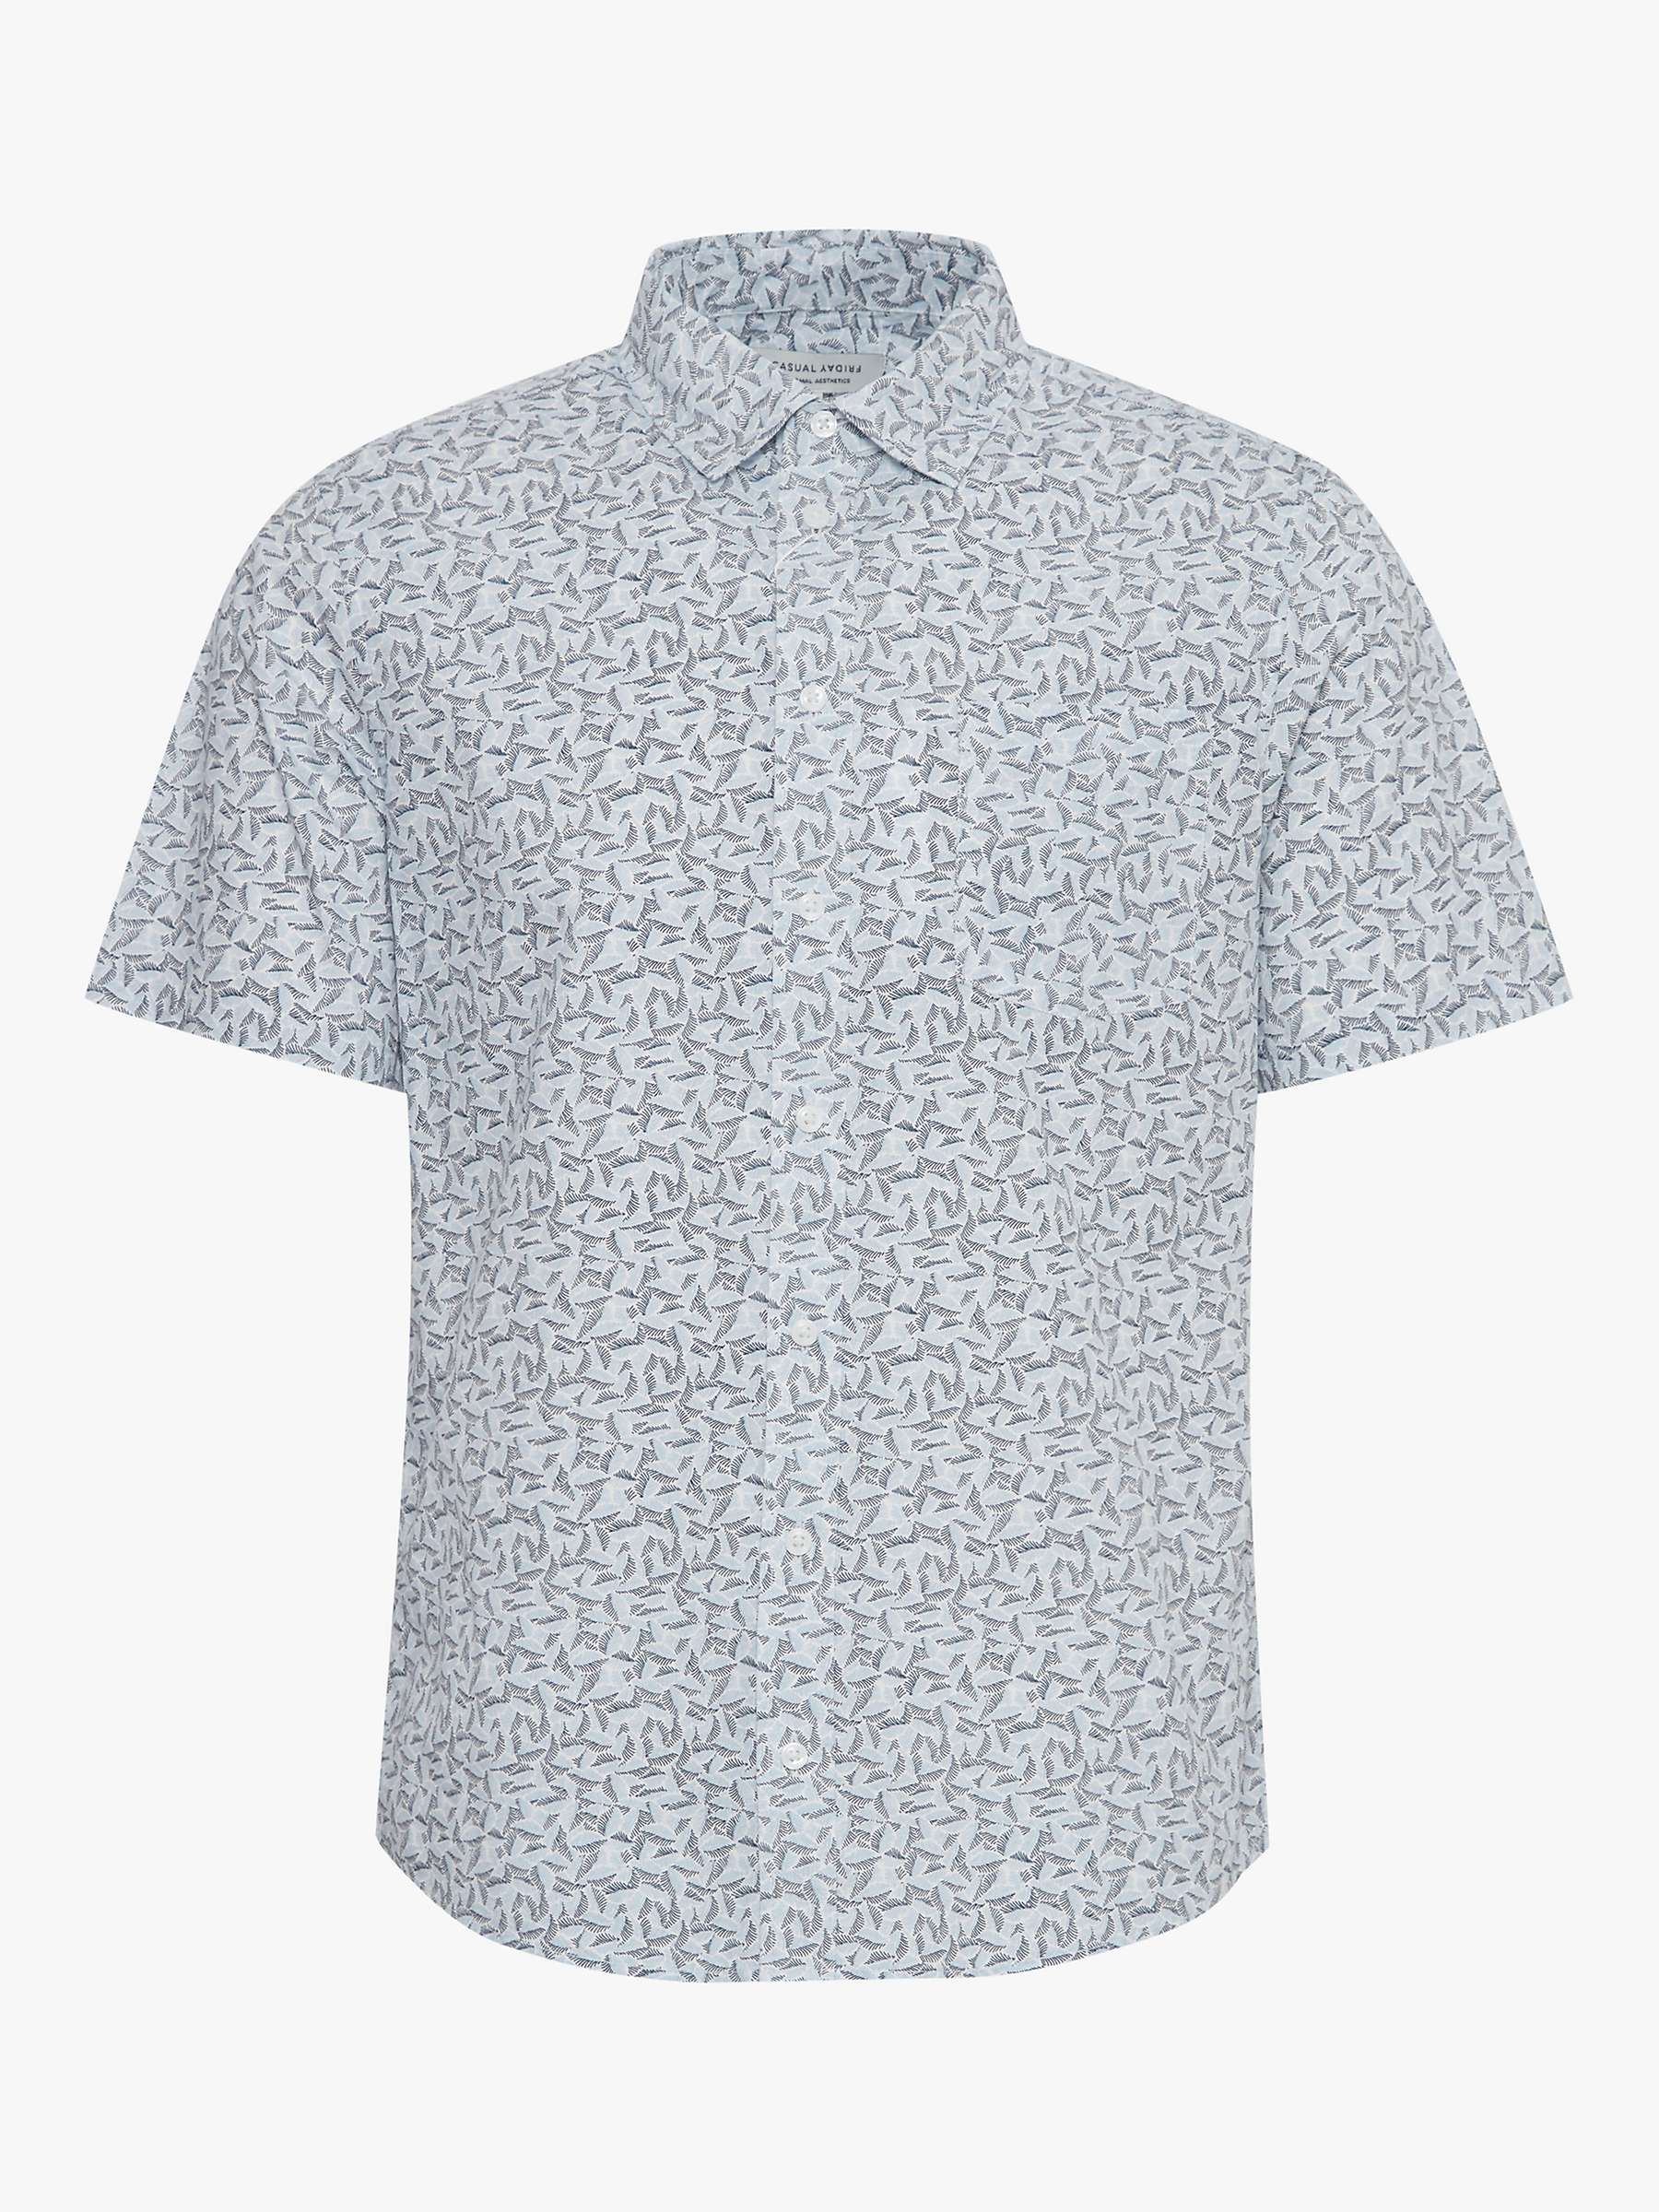 Buy Casual Friday Anton Short Sleeve Leaf Printed Shirt, Chambray Blue Online at johnlewis.com